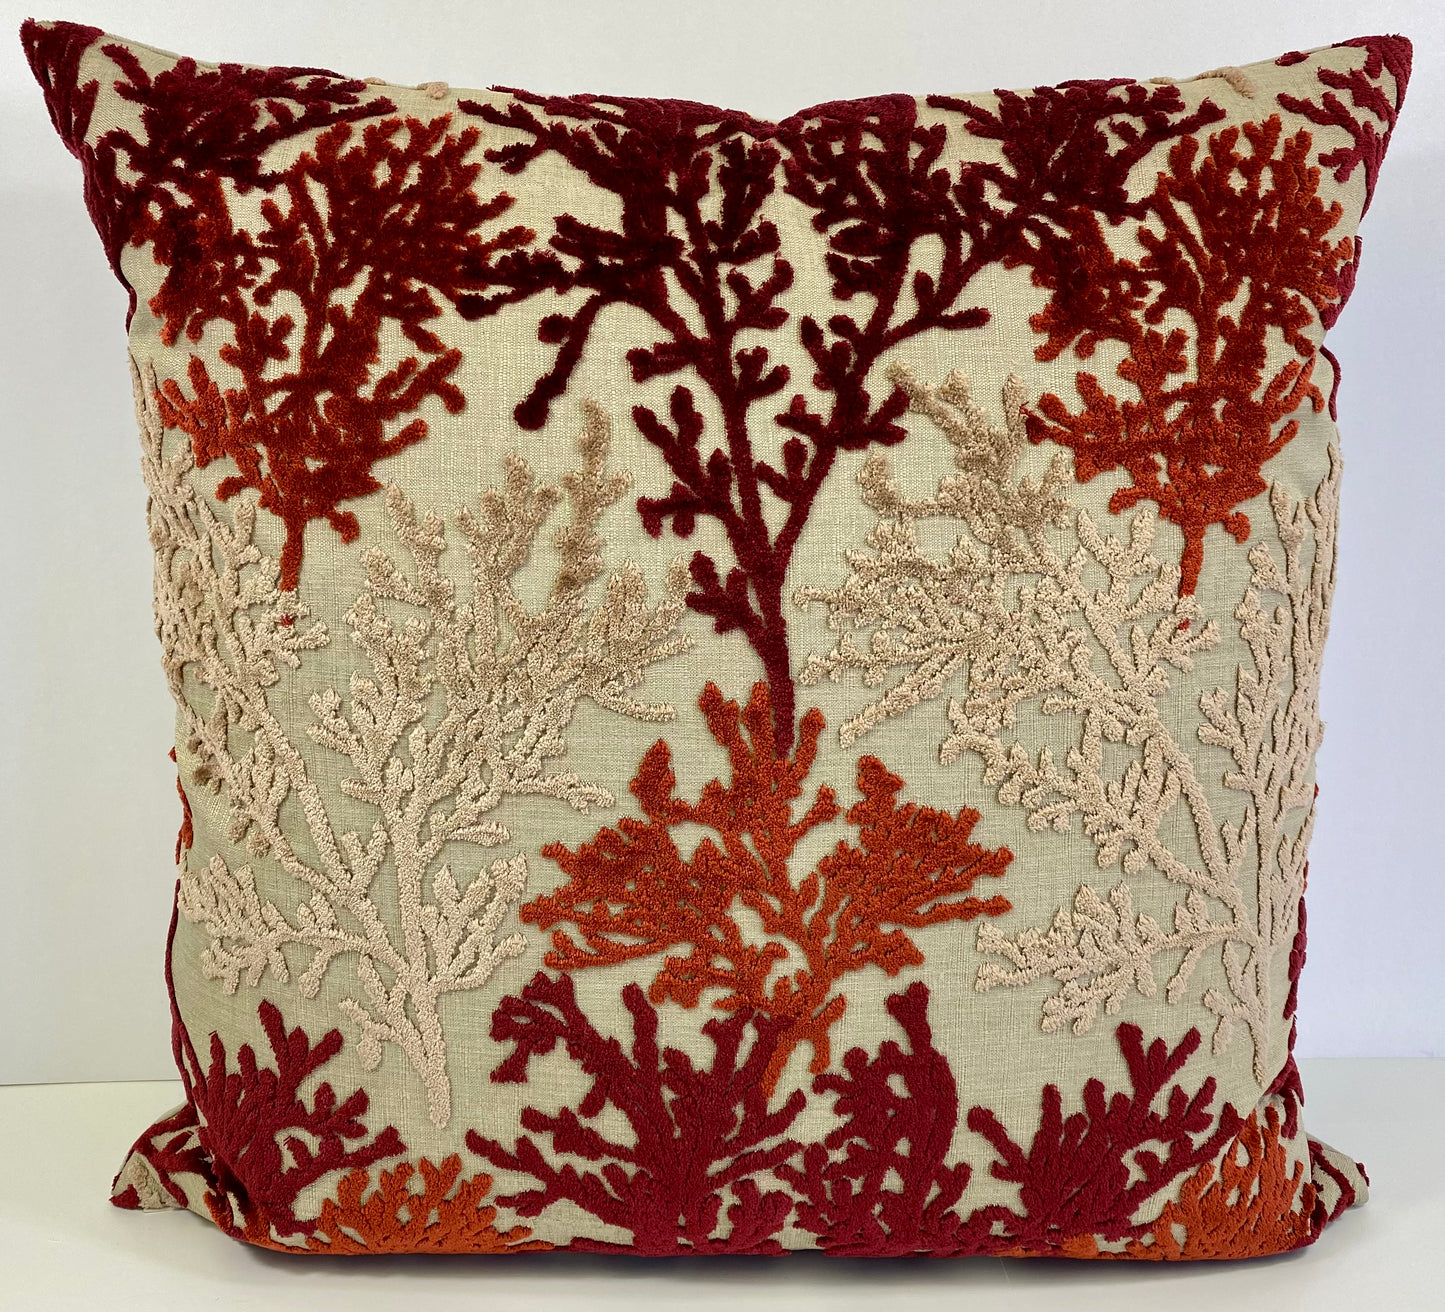 Luxury Pillow -  24" x 24" - Barbados - Sunset; Embroidered coral fans on a sandy colored base